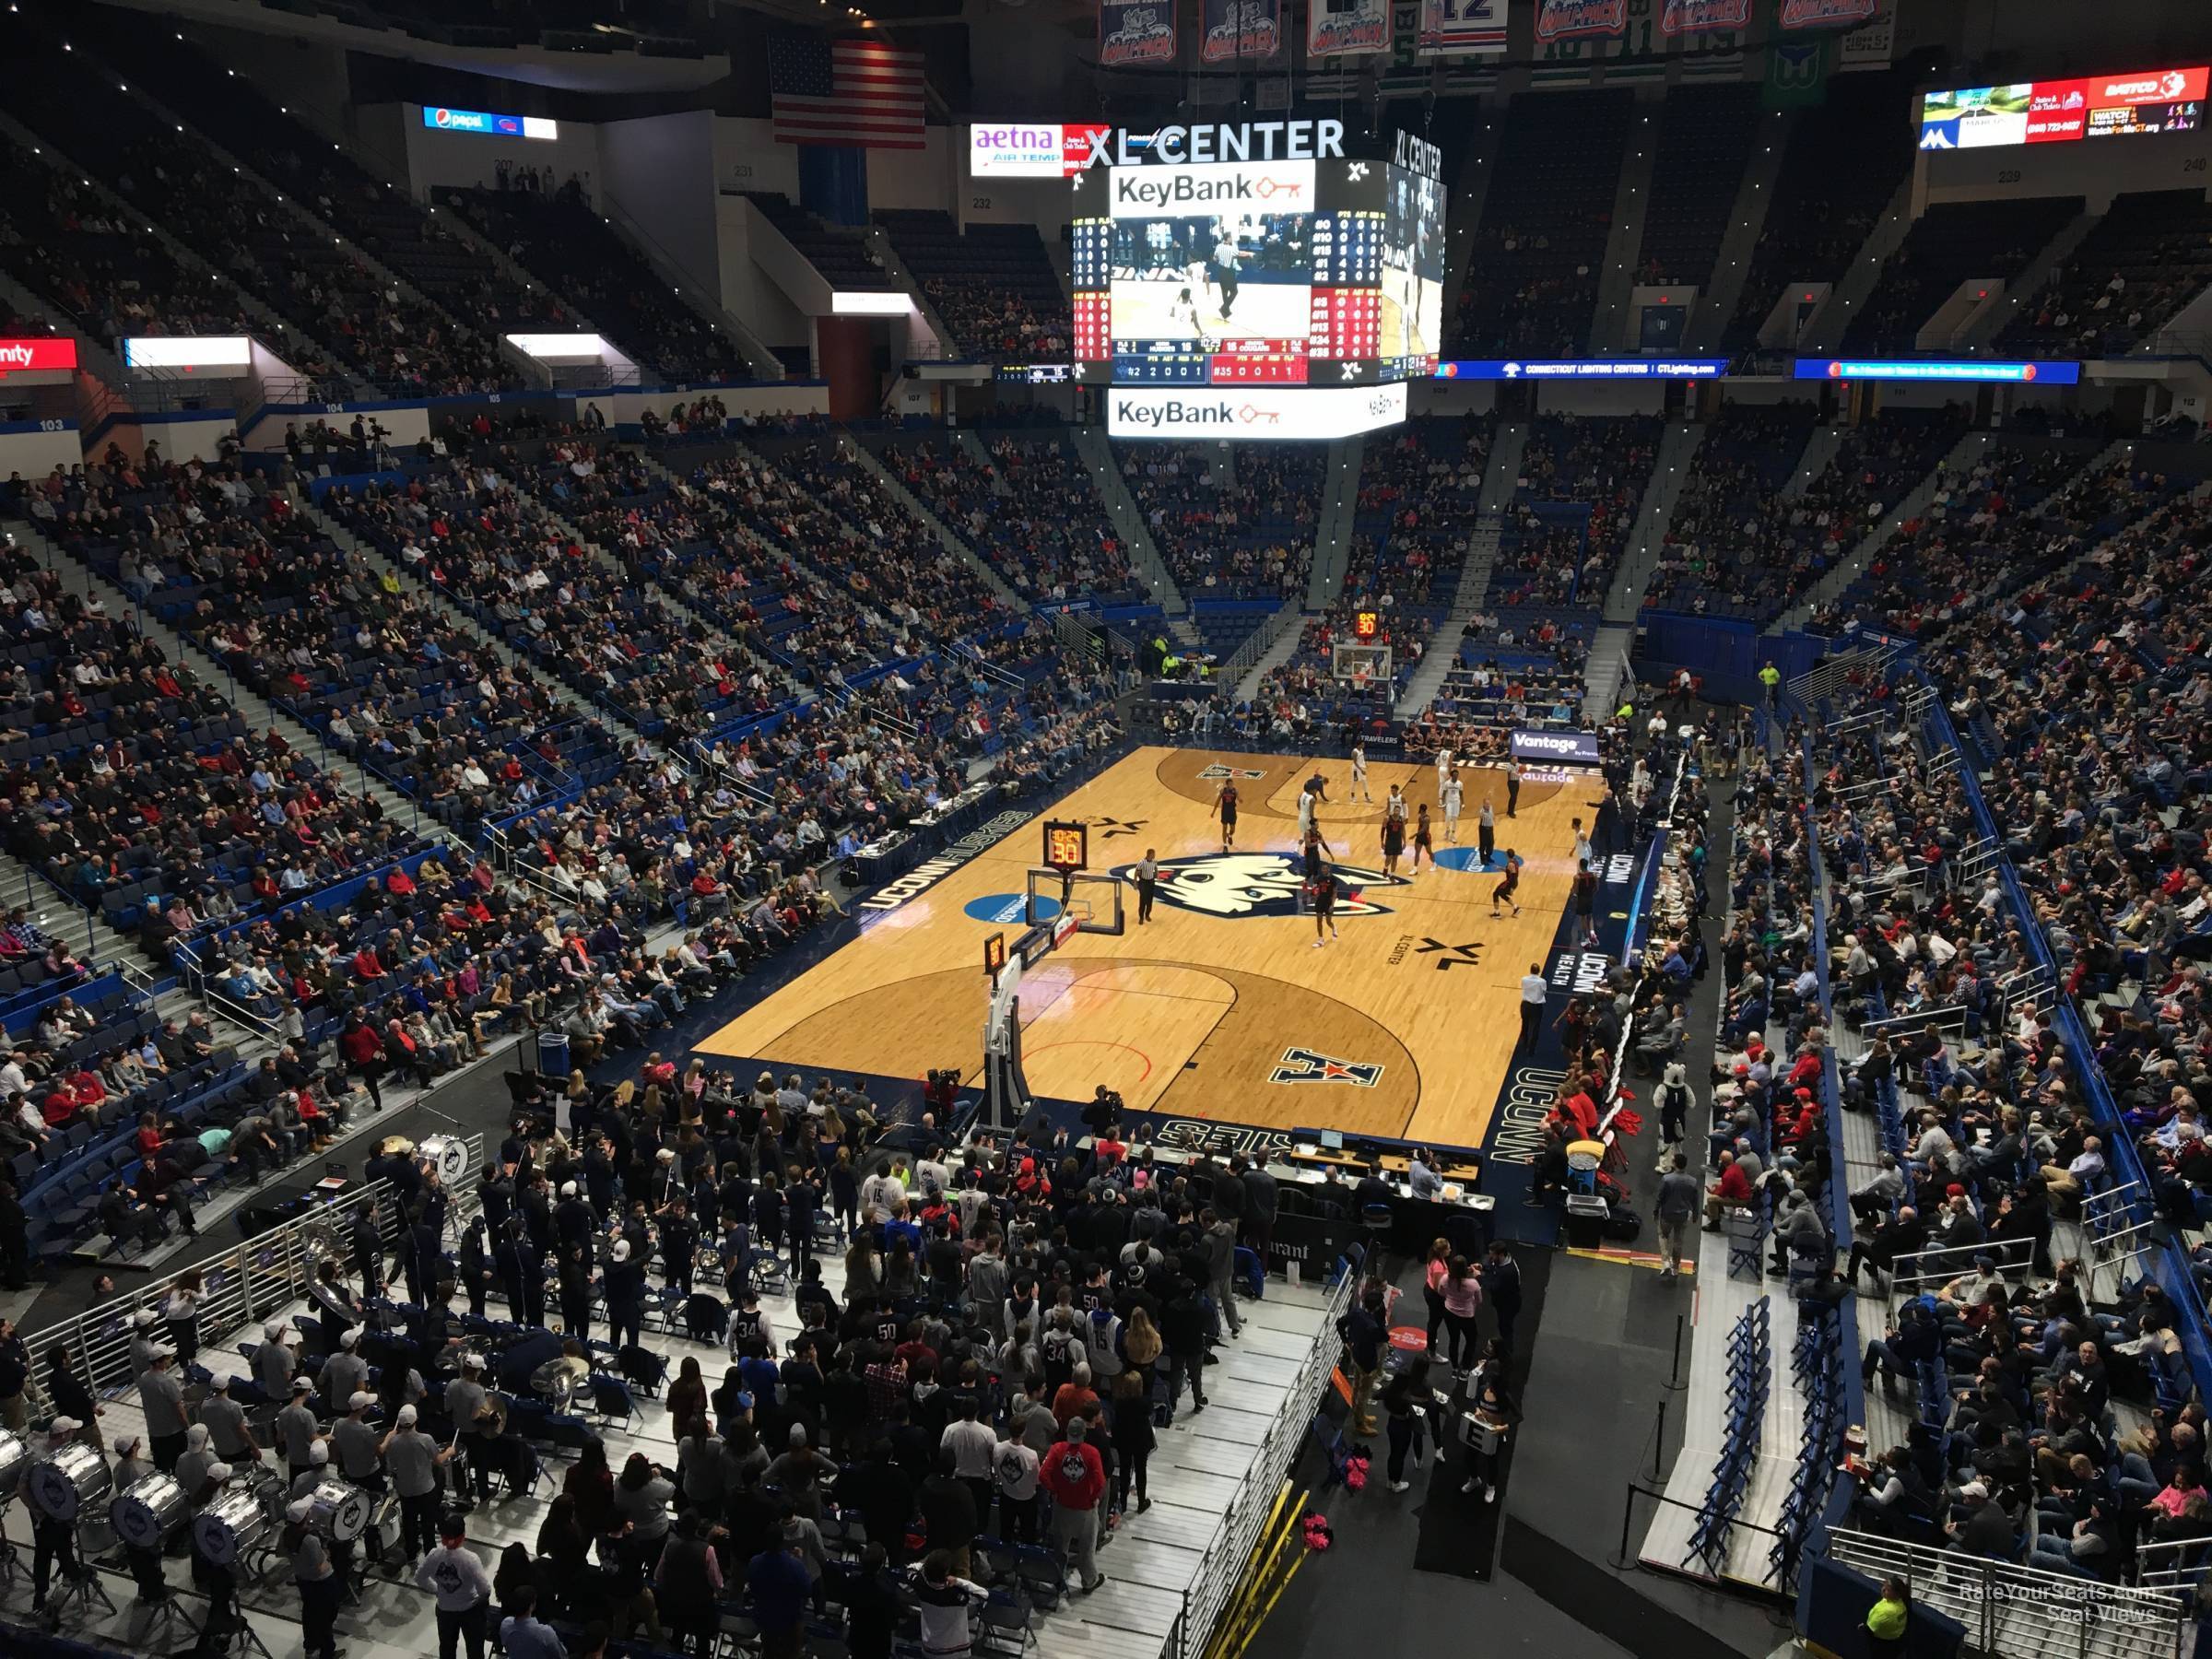 section 222, row a seat view  - xl center